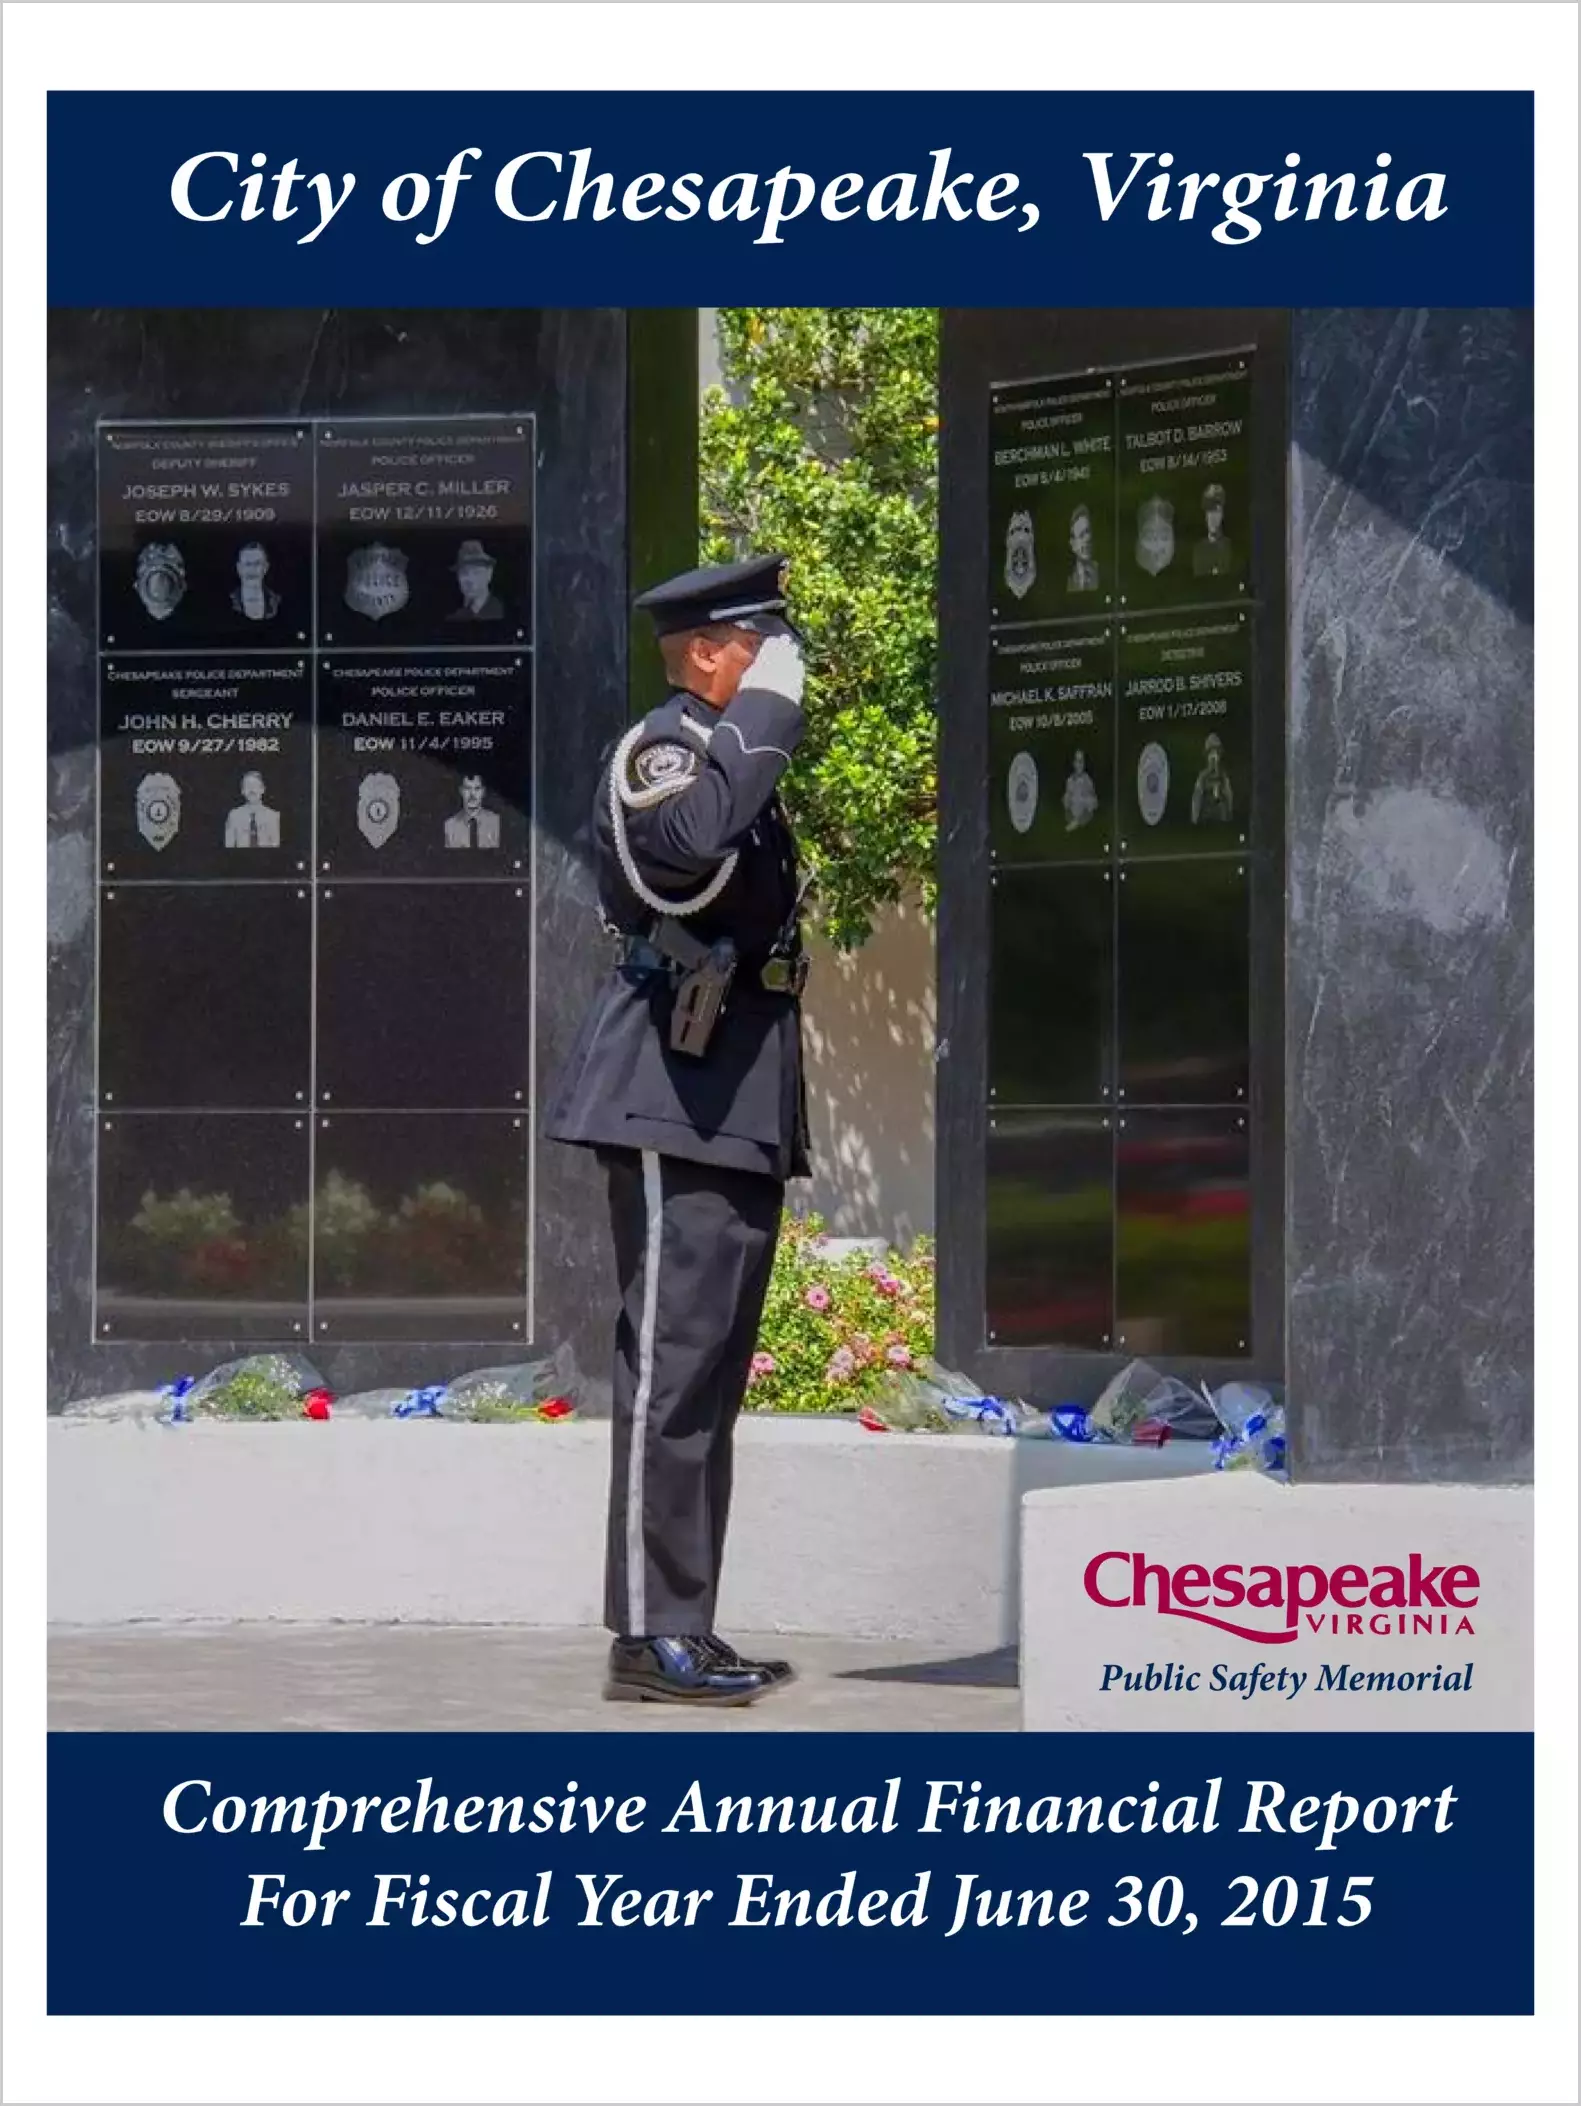 2015 Public Schools Annual Financial Report for City of Chesapeake